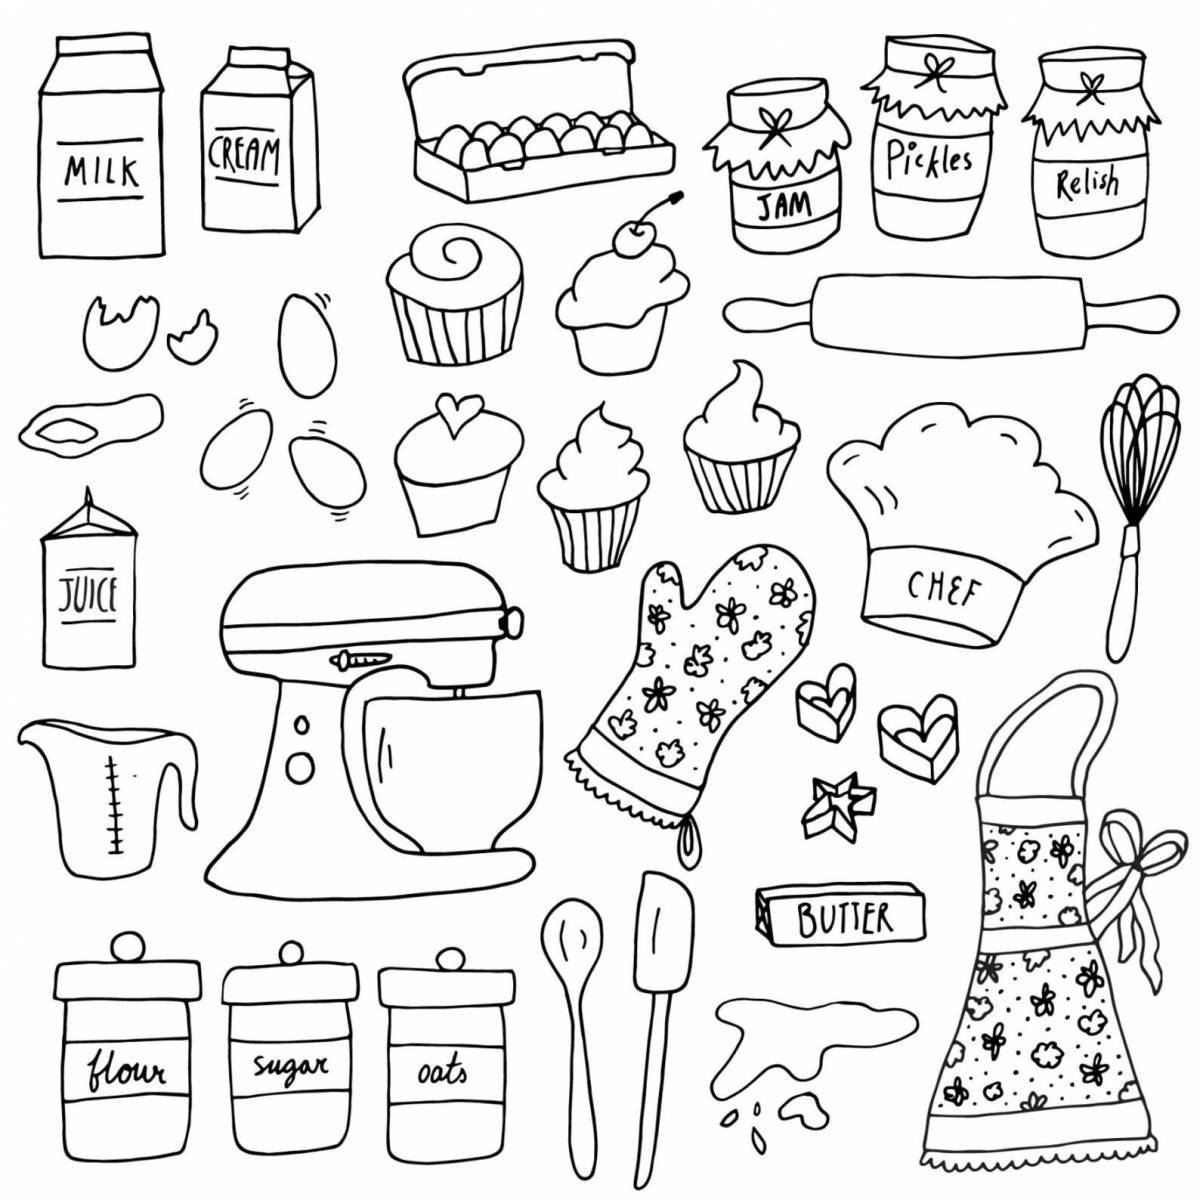 Awesome doll food coloring page